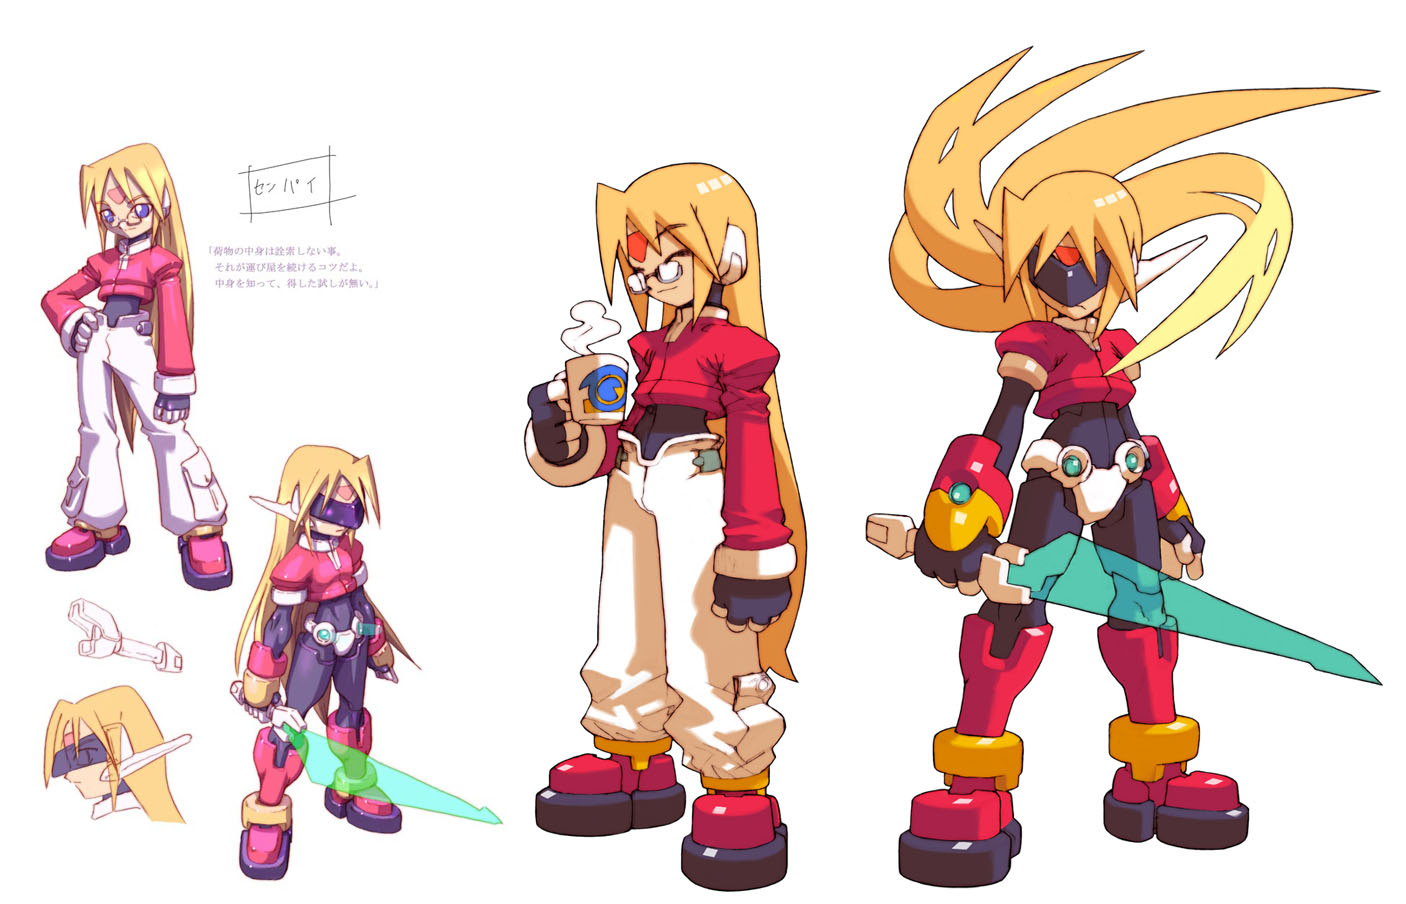 The Making of the Rockman ZX Series Part 4: Character Design.